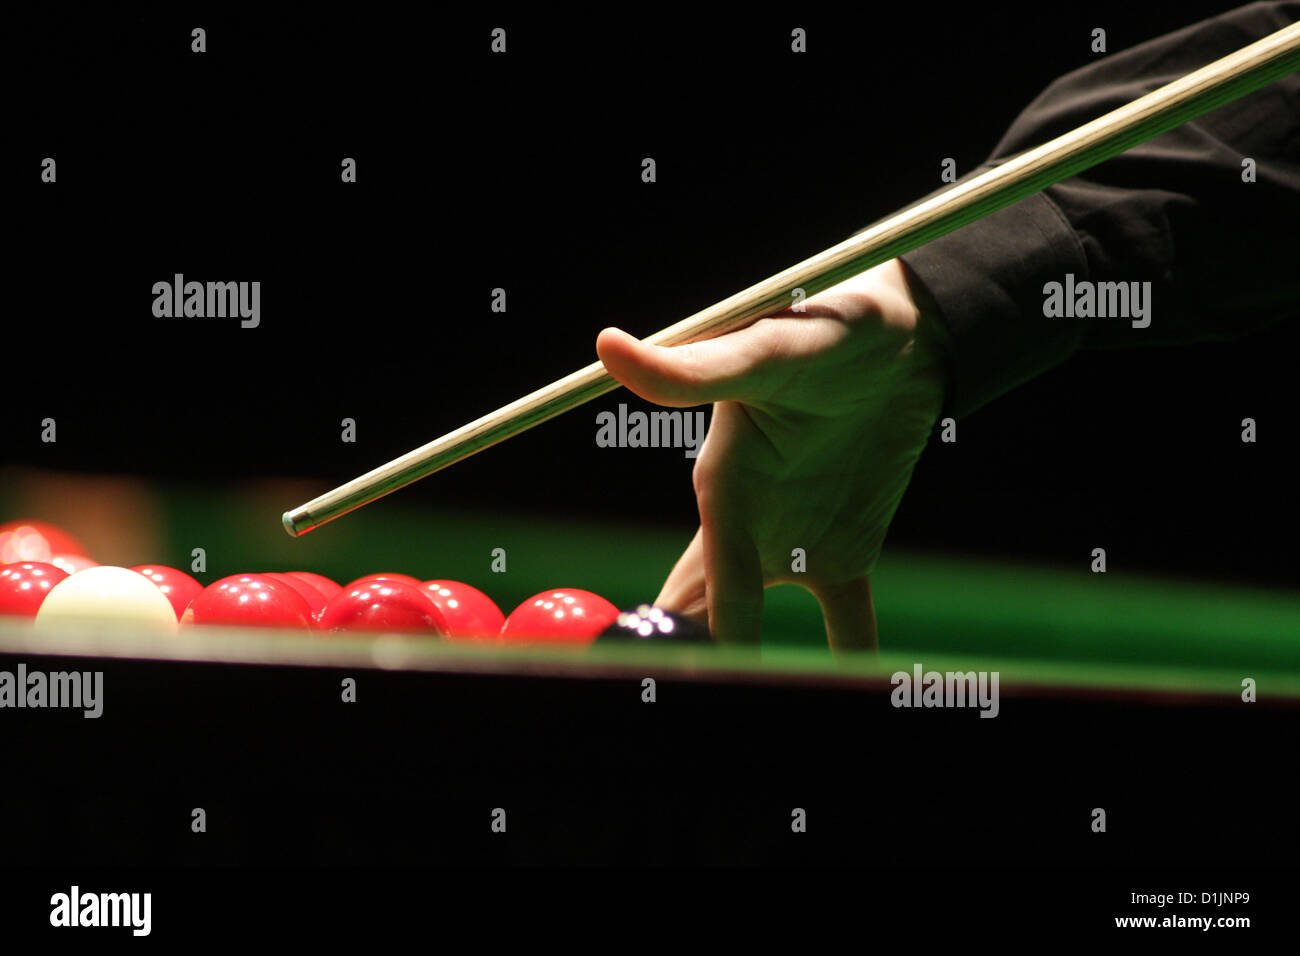 Snooker player man aiming the cue ball Stock Photo